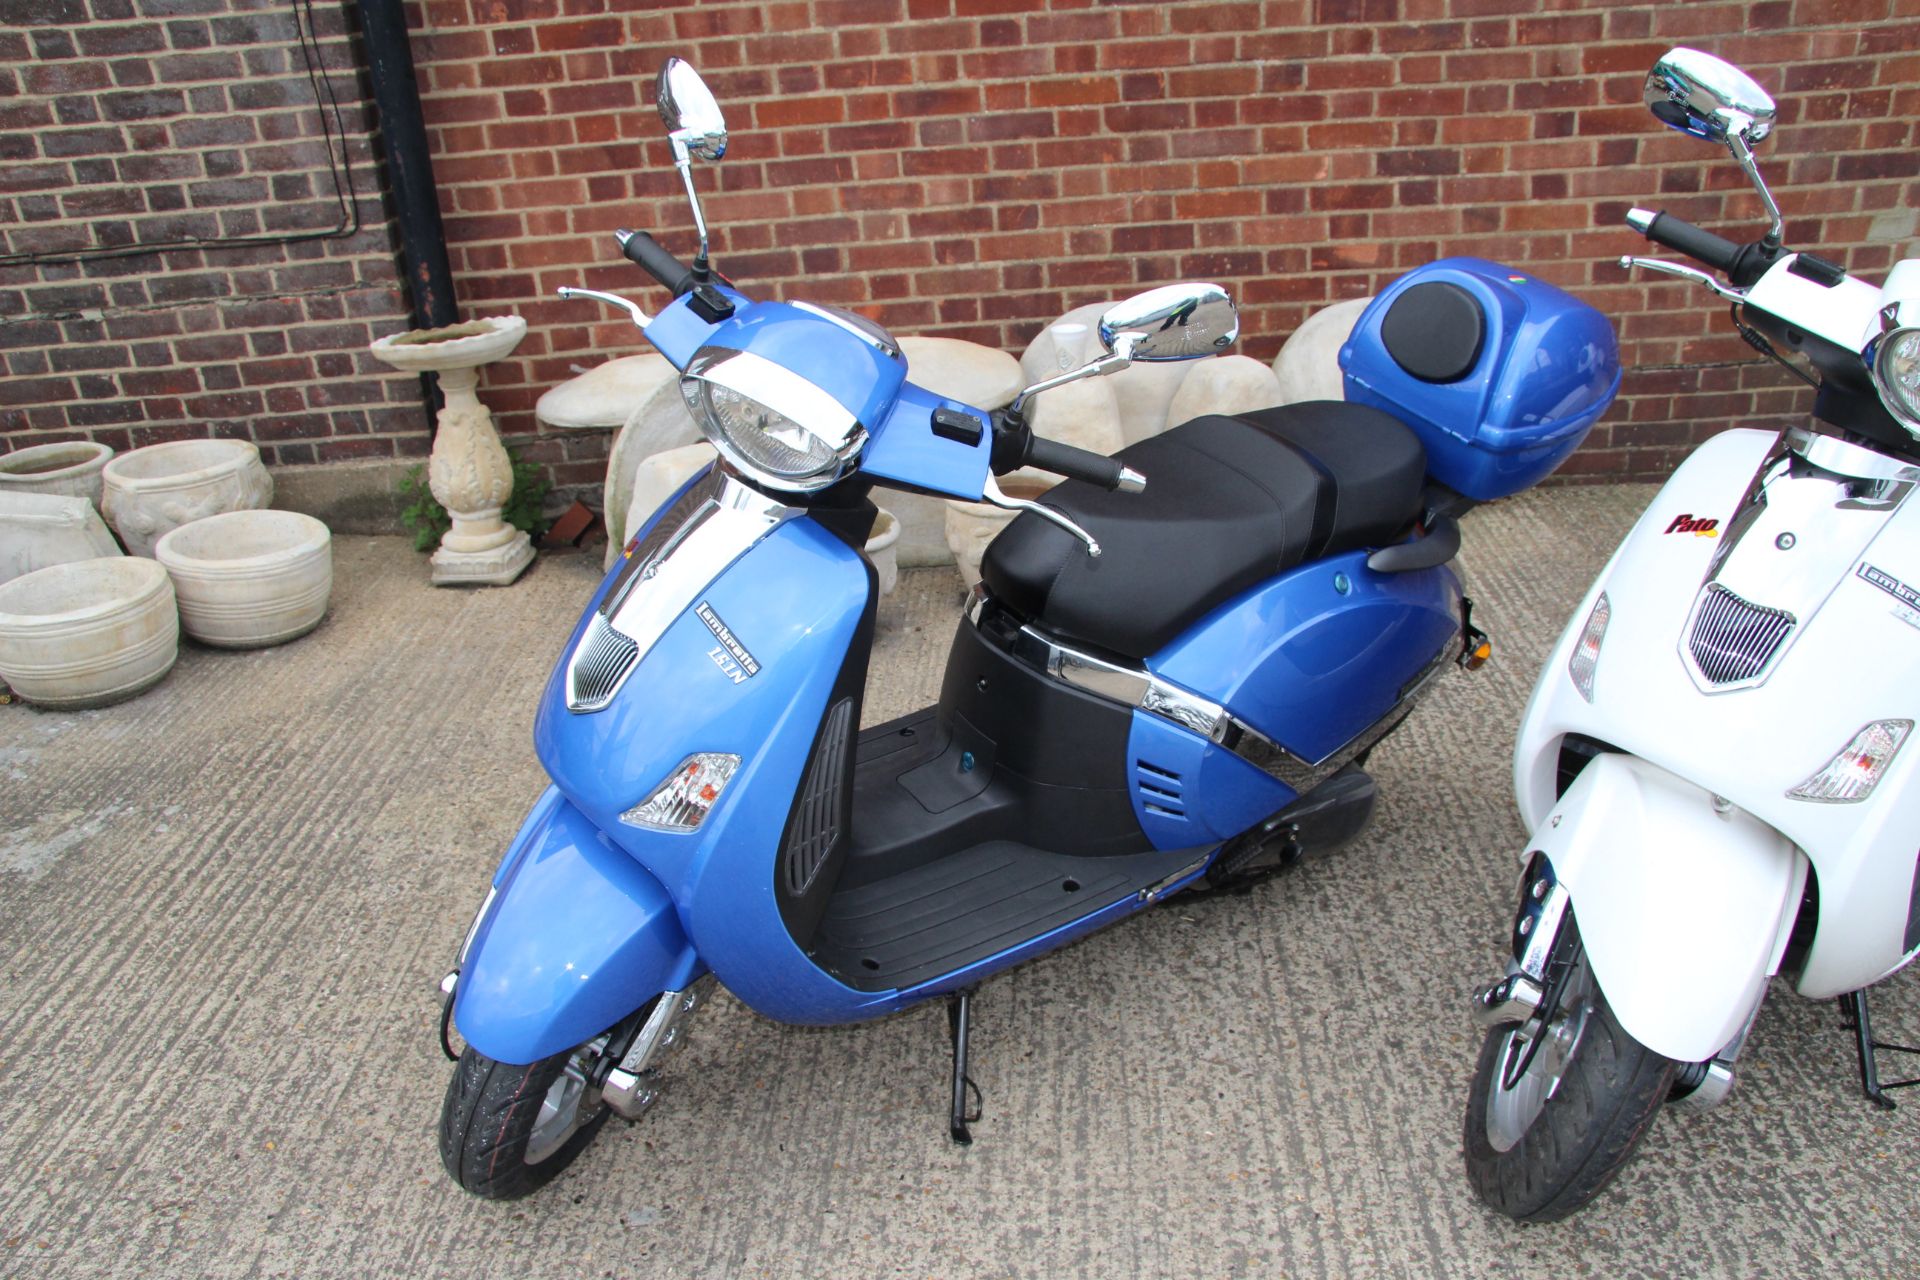 V Brand New Lambretta Pato 151cc Scooter-white -/Mileage 00000 Boxed ISP £1250 (Motorcycle Movers)